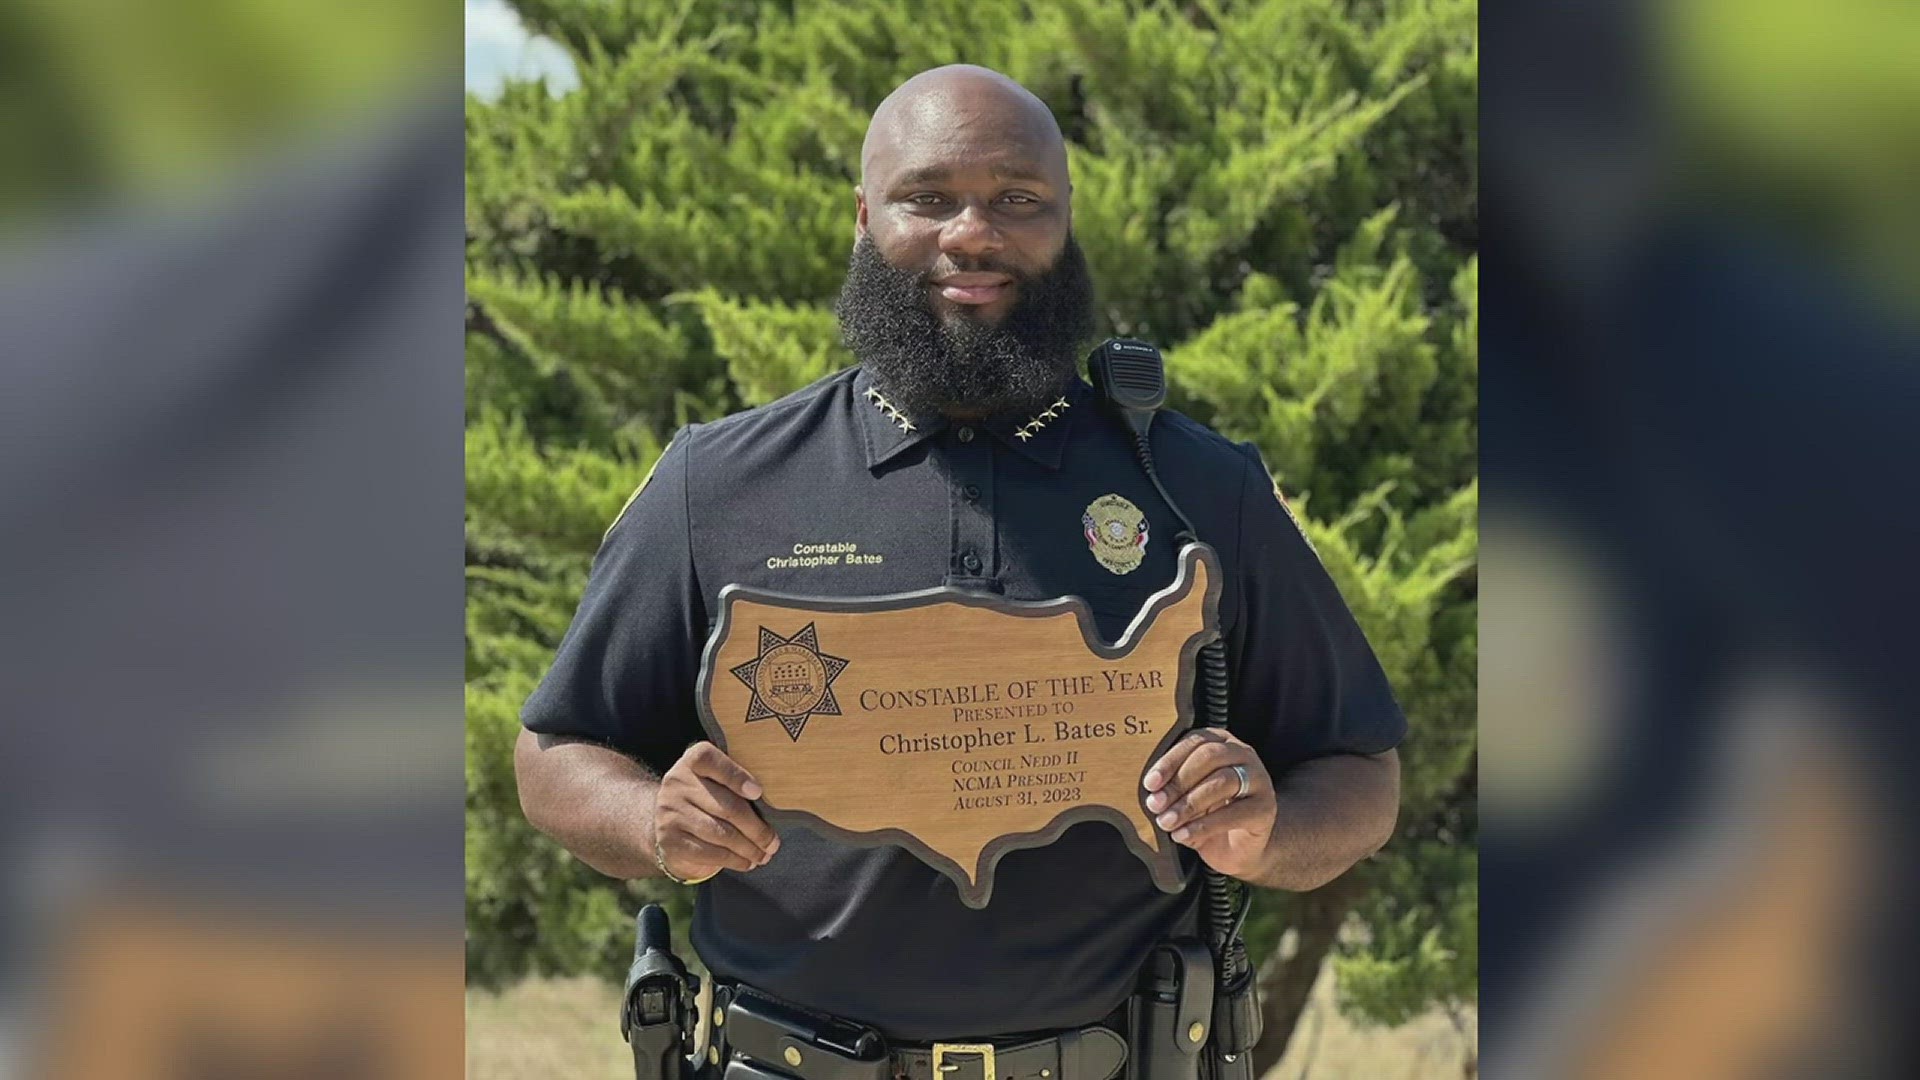 Constable Christopher Bates, Sr. was named 2023 United States Constable of the Year by the National Constables and Marshals Association.